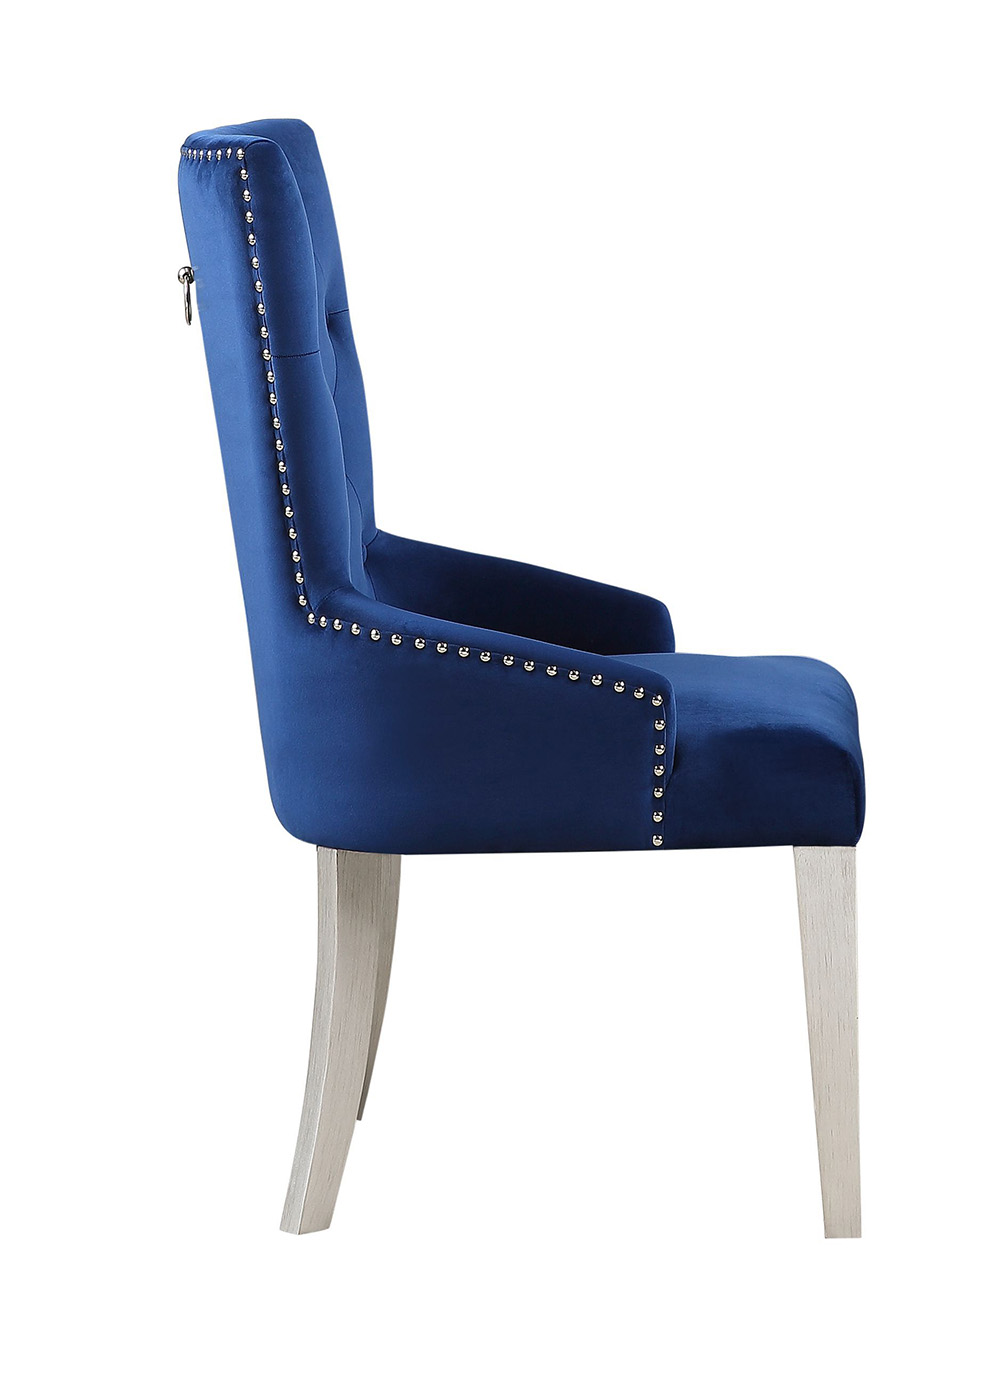 ACME Varian Fabric Upholstered Dining Chair with Button Tufted  Backrest, and Wood Legs, for Restaurant, Cafe, Tavern, Office, Living Room - Blue